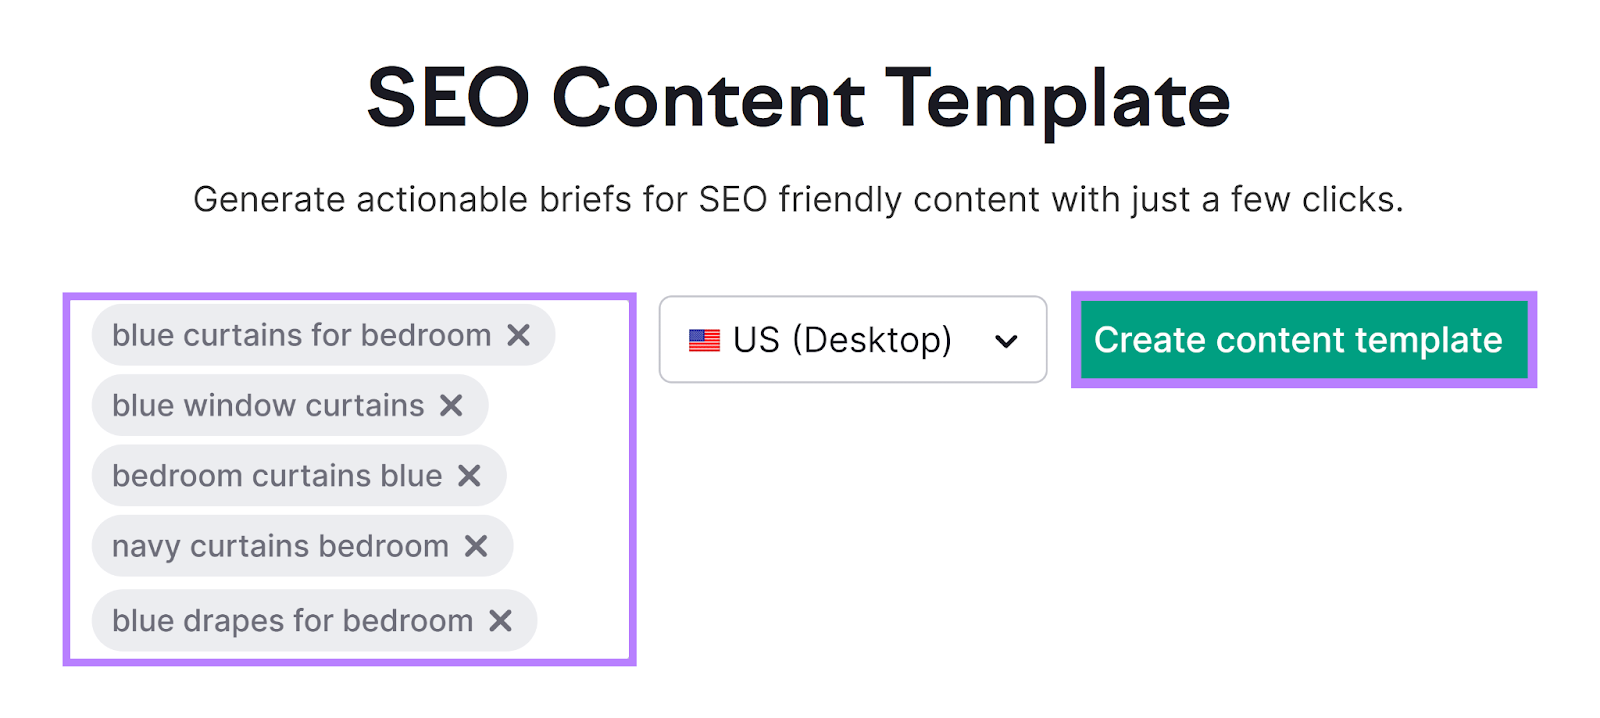 SEO content template tool with keywords entered and Create content template button highlighted